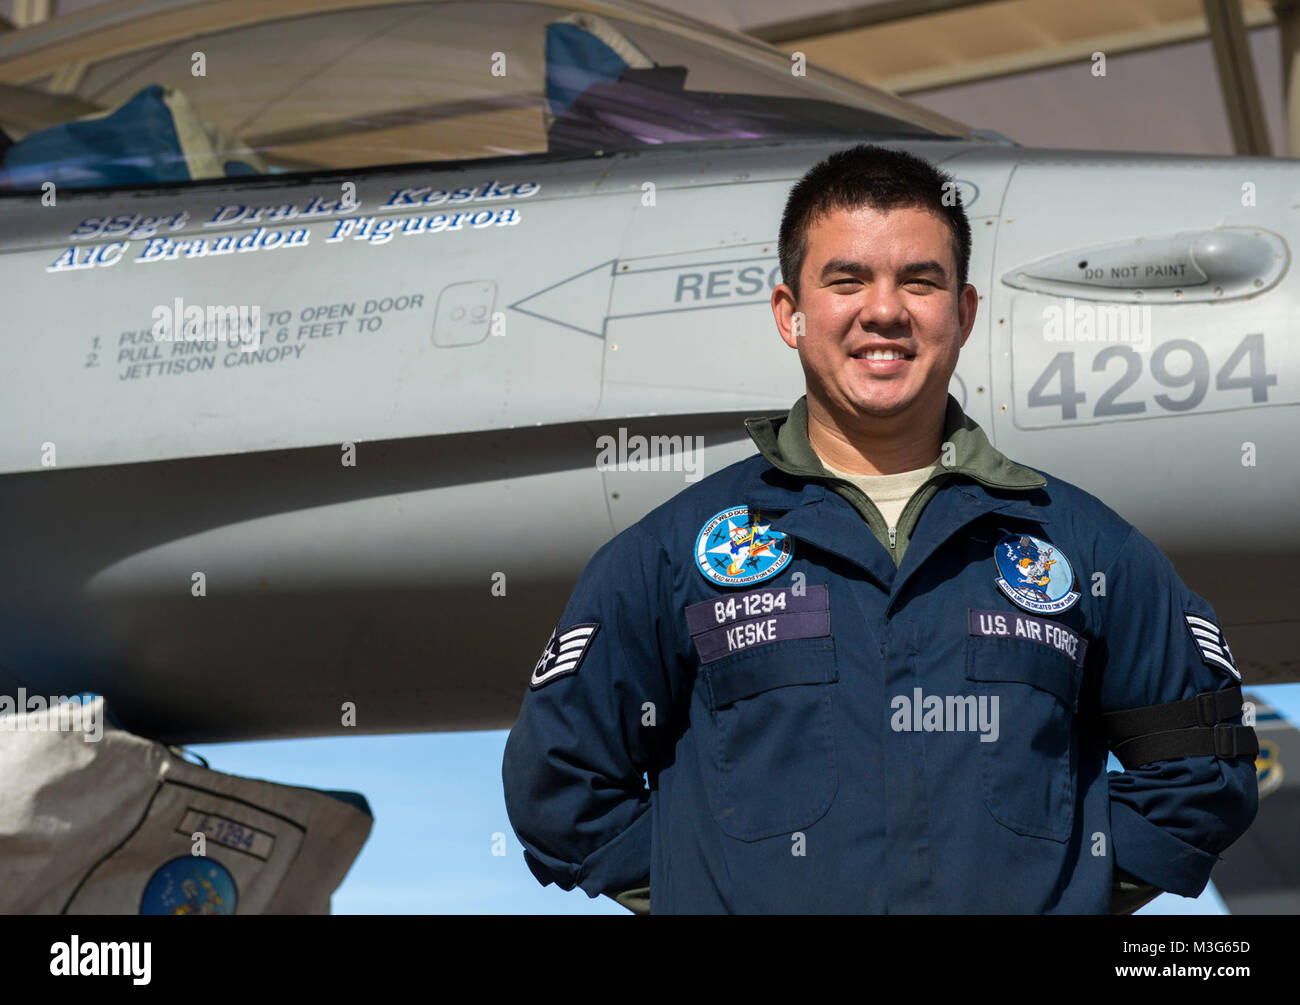 Staff Sgt. Drake Keske, 309th Aircraft Maintenance Unit dedicated crew chief, poses for a portrait in front of his assigned aircraft at Luke Air Force Base, Ariz., Jan. 25, 2018.  Assigned to an F-16 Fighting Falcon, Keske is one of many technically proficient maintenance professionals from the 309th AMU. The name of the DCC and assistant DCC are displayed alongside their assigned aircraft in honor of their dedication. (U.S. Air Force Stock Photo